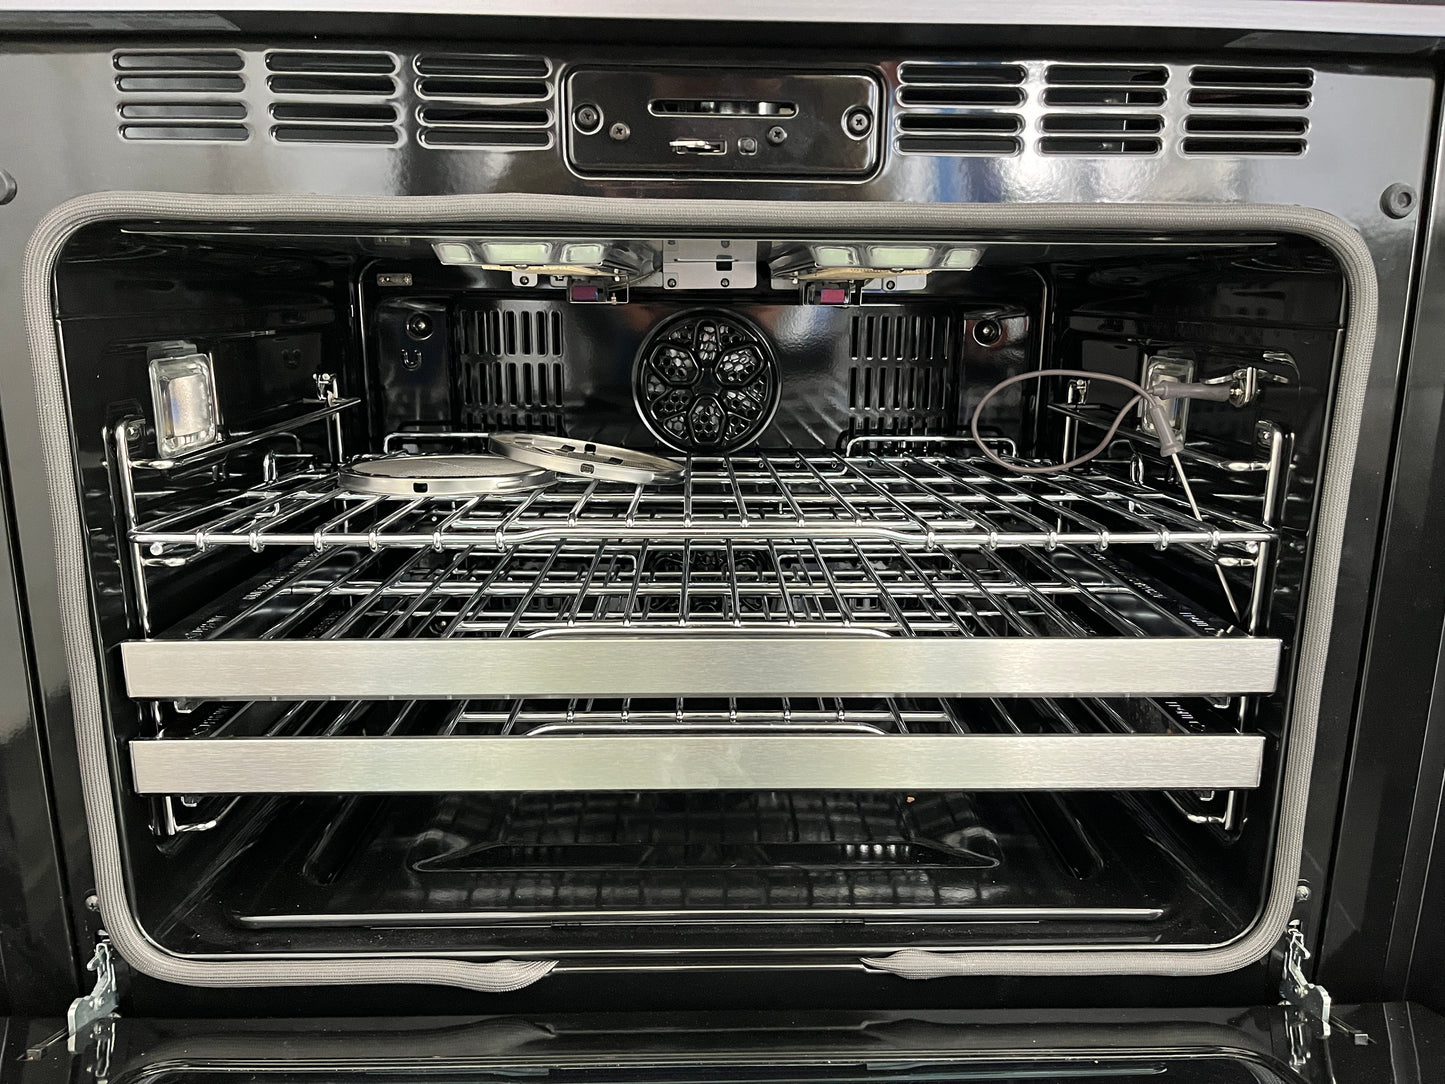 Dacor  DOP36M96GLM 36 Inch Professional Gas Range 6 Sealed Burners, 5.4 cu. ft. Oven Capacity, Self-Clean, and Dual-Stack Burners, Graphite Stainless ,black stainless, 369292